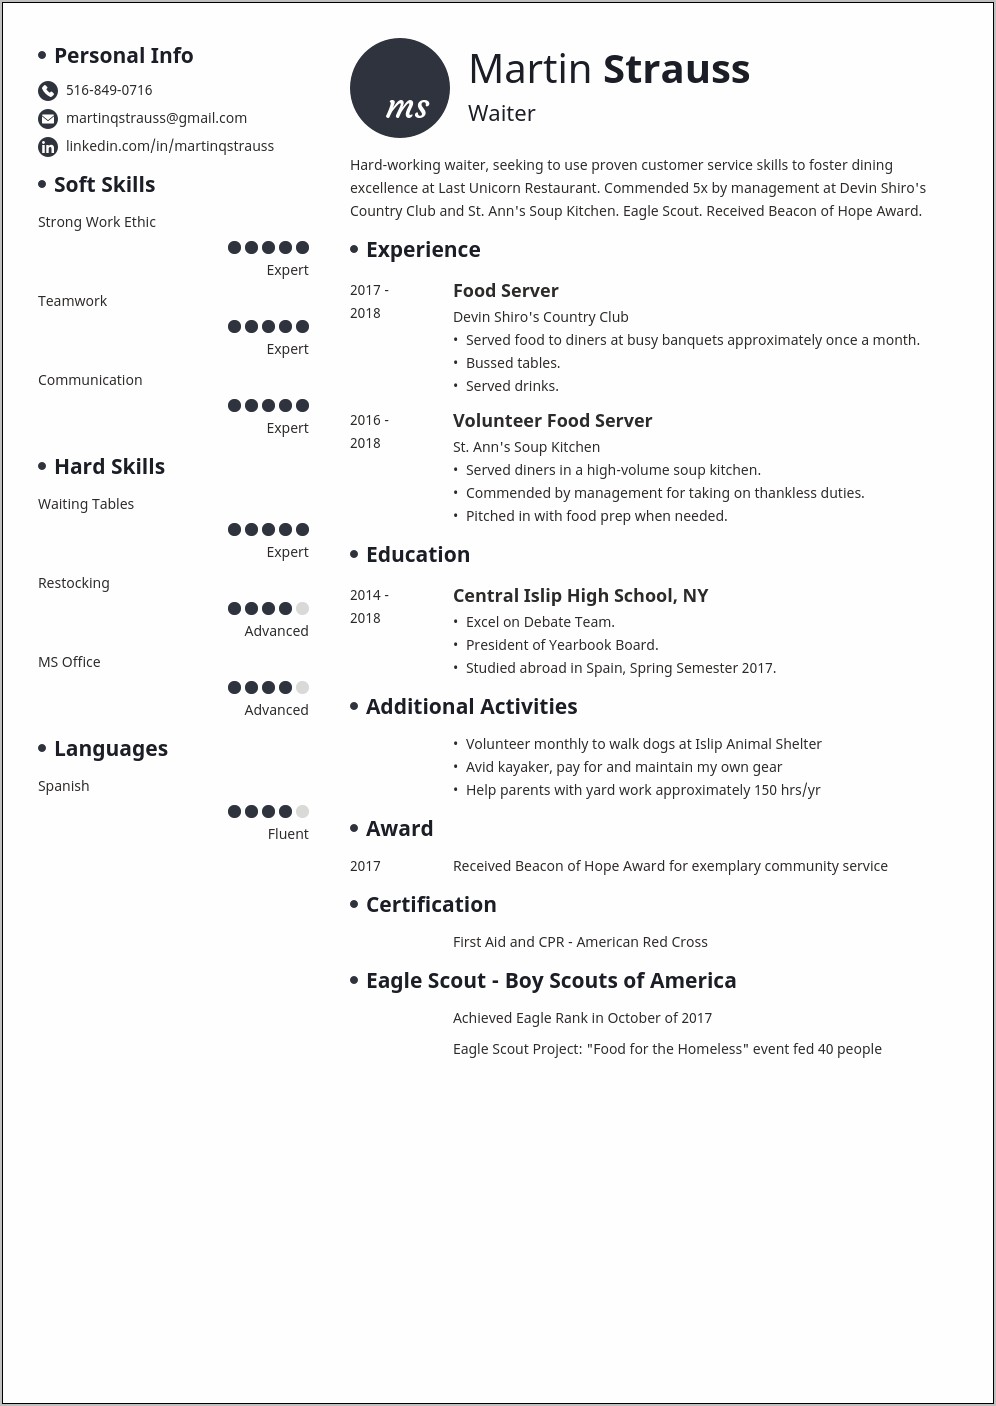 Resume Samples For 19 Year Olds